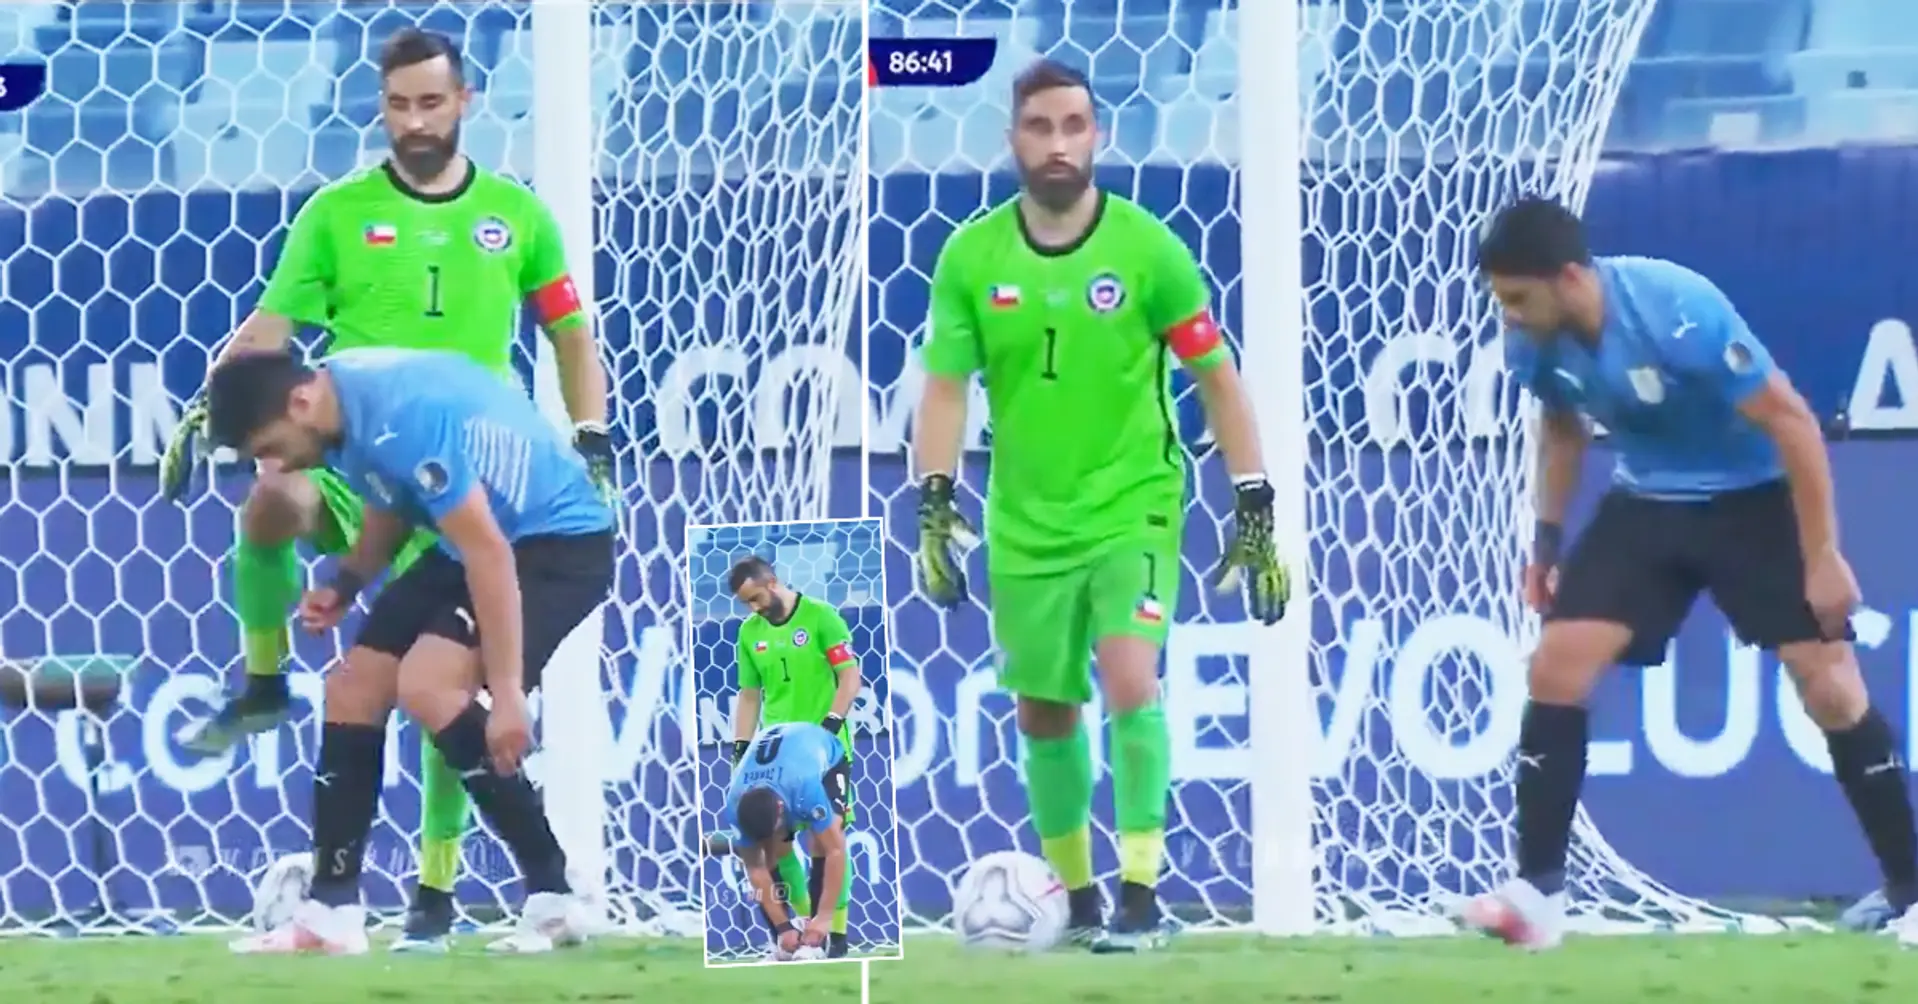 Embarrassing: Luis Suarez’s shameless timewasting in front of Claudio Bravo caught on camera